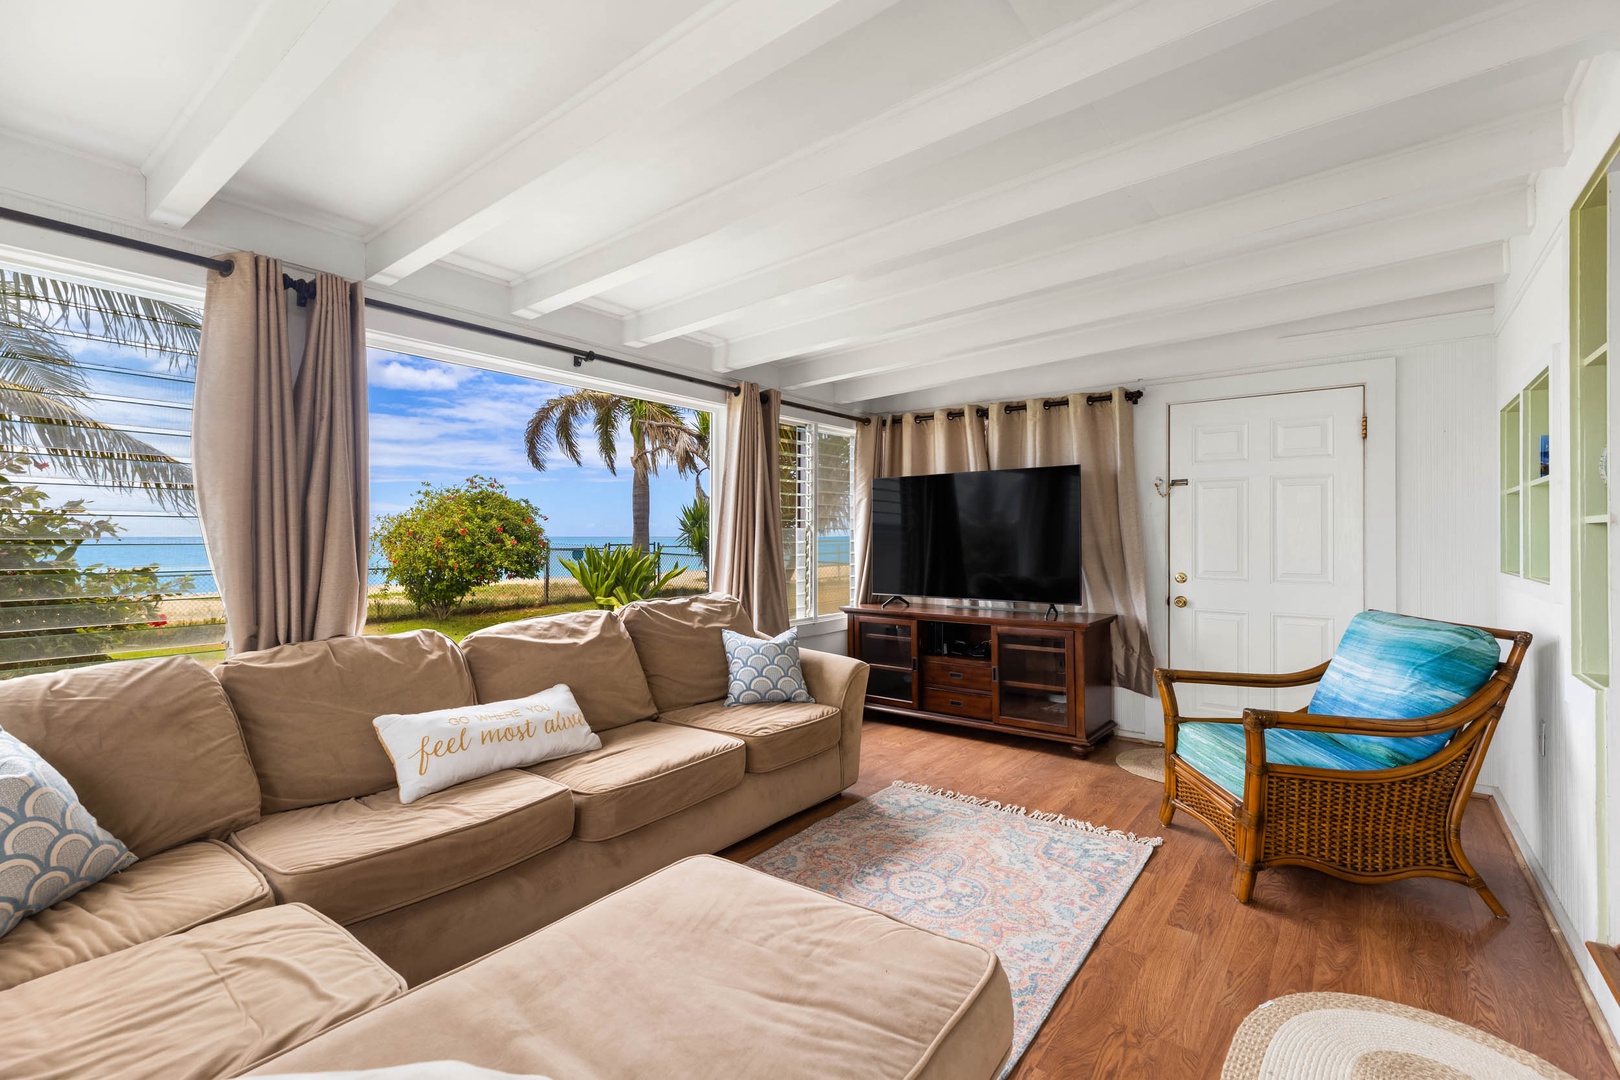 Ewa Beach Vacation Rentals, Ewa Beachfront Cottage - Cozy family den equipped with a plush sectional sofa and TV, perfect for binge-watching your favorite shows together.